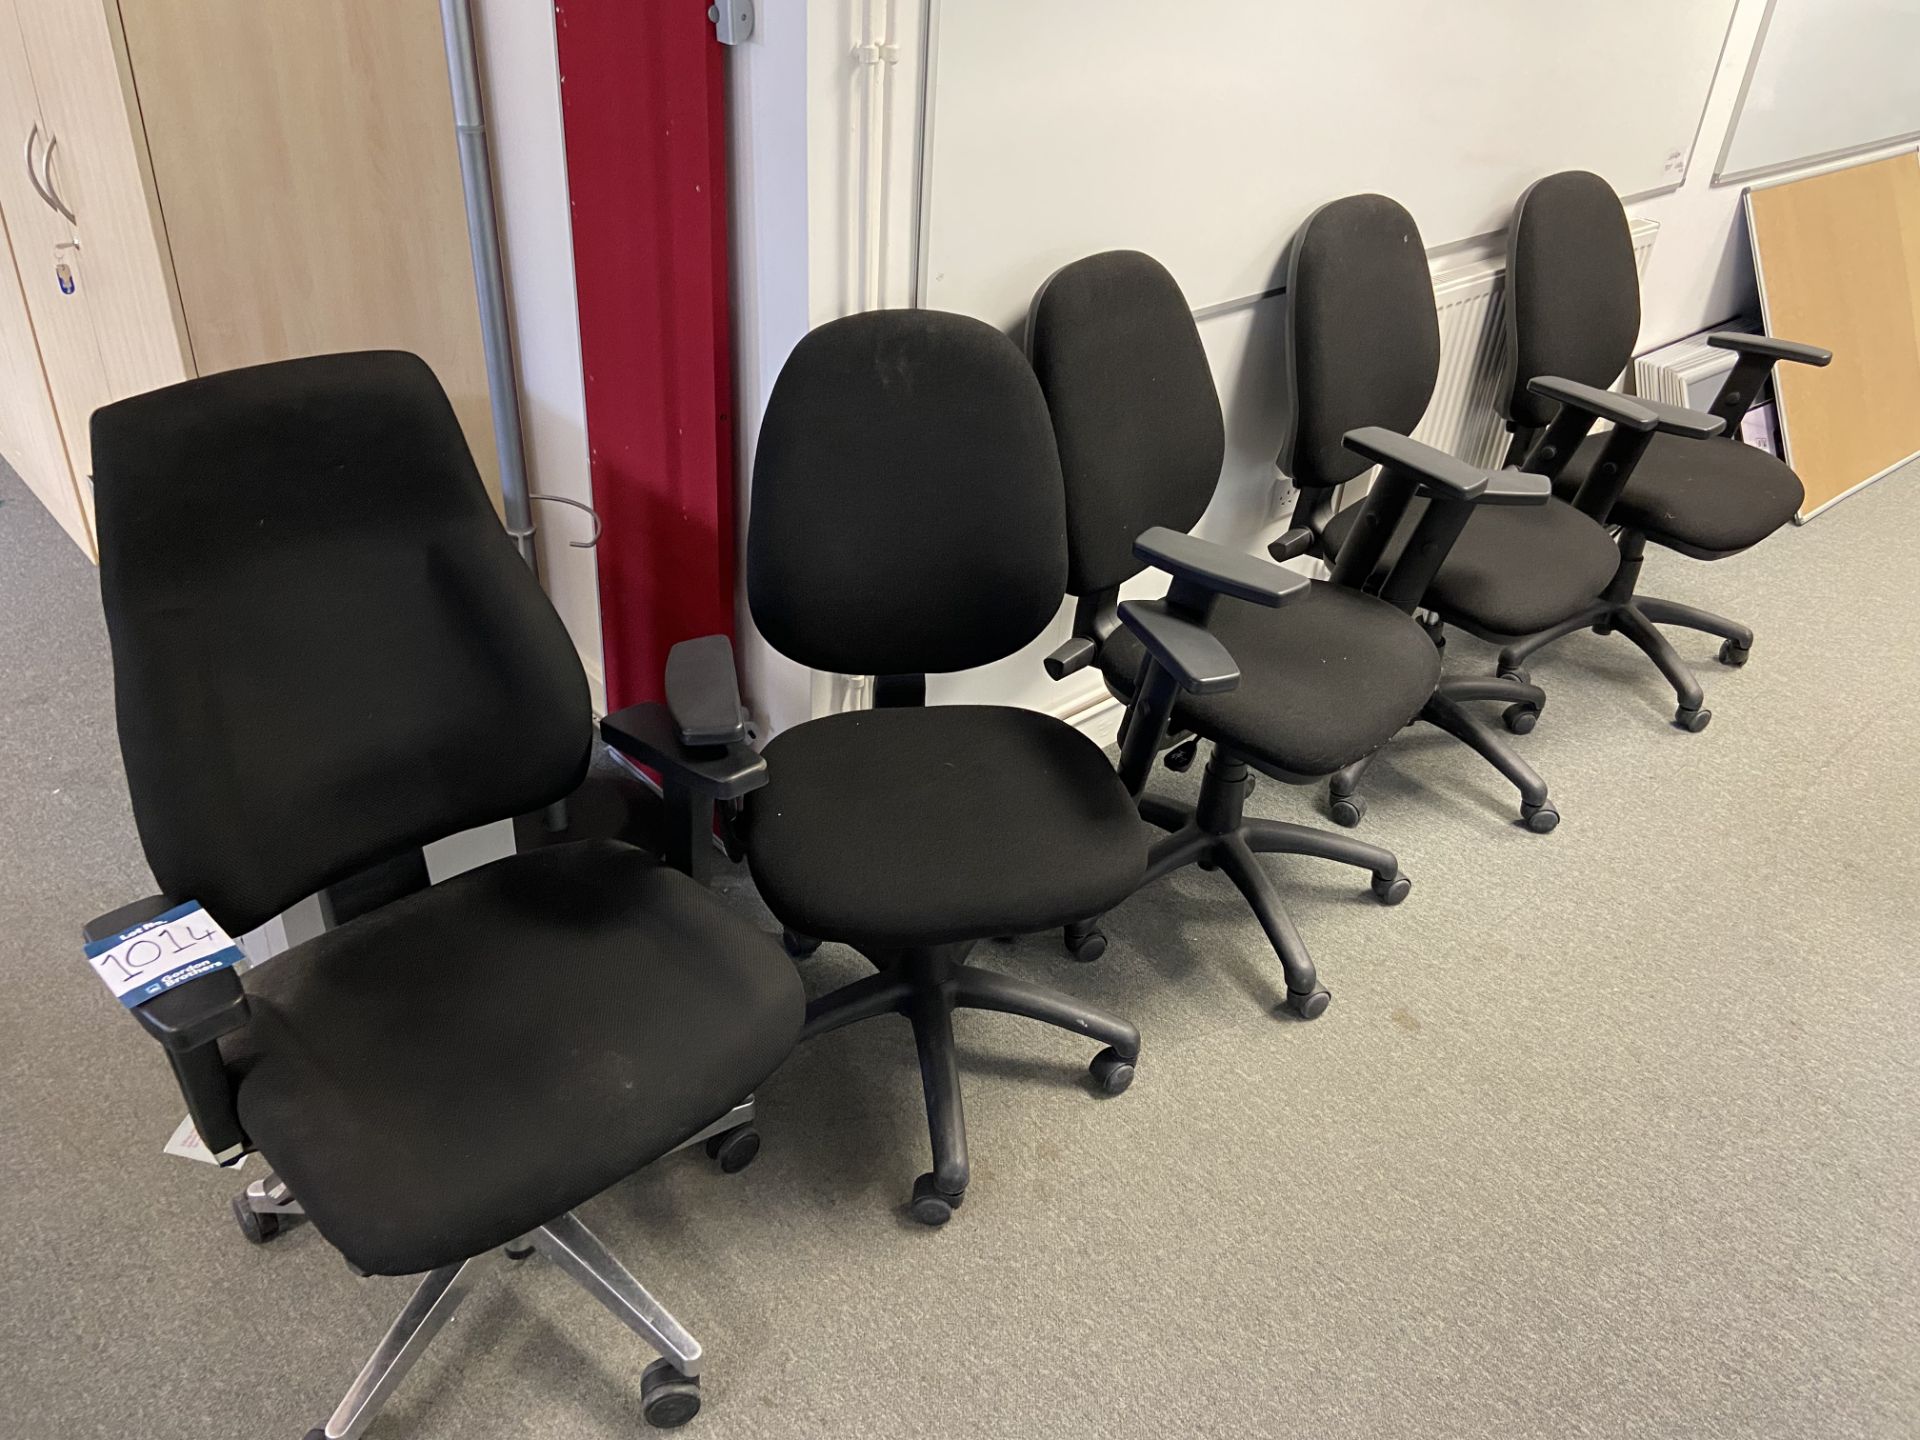 Lot comprisng: five office chairs